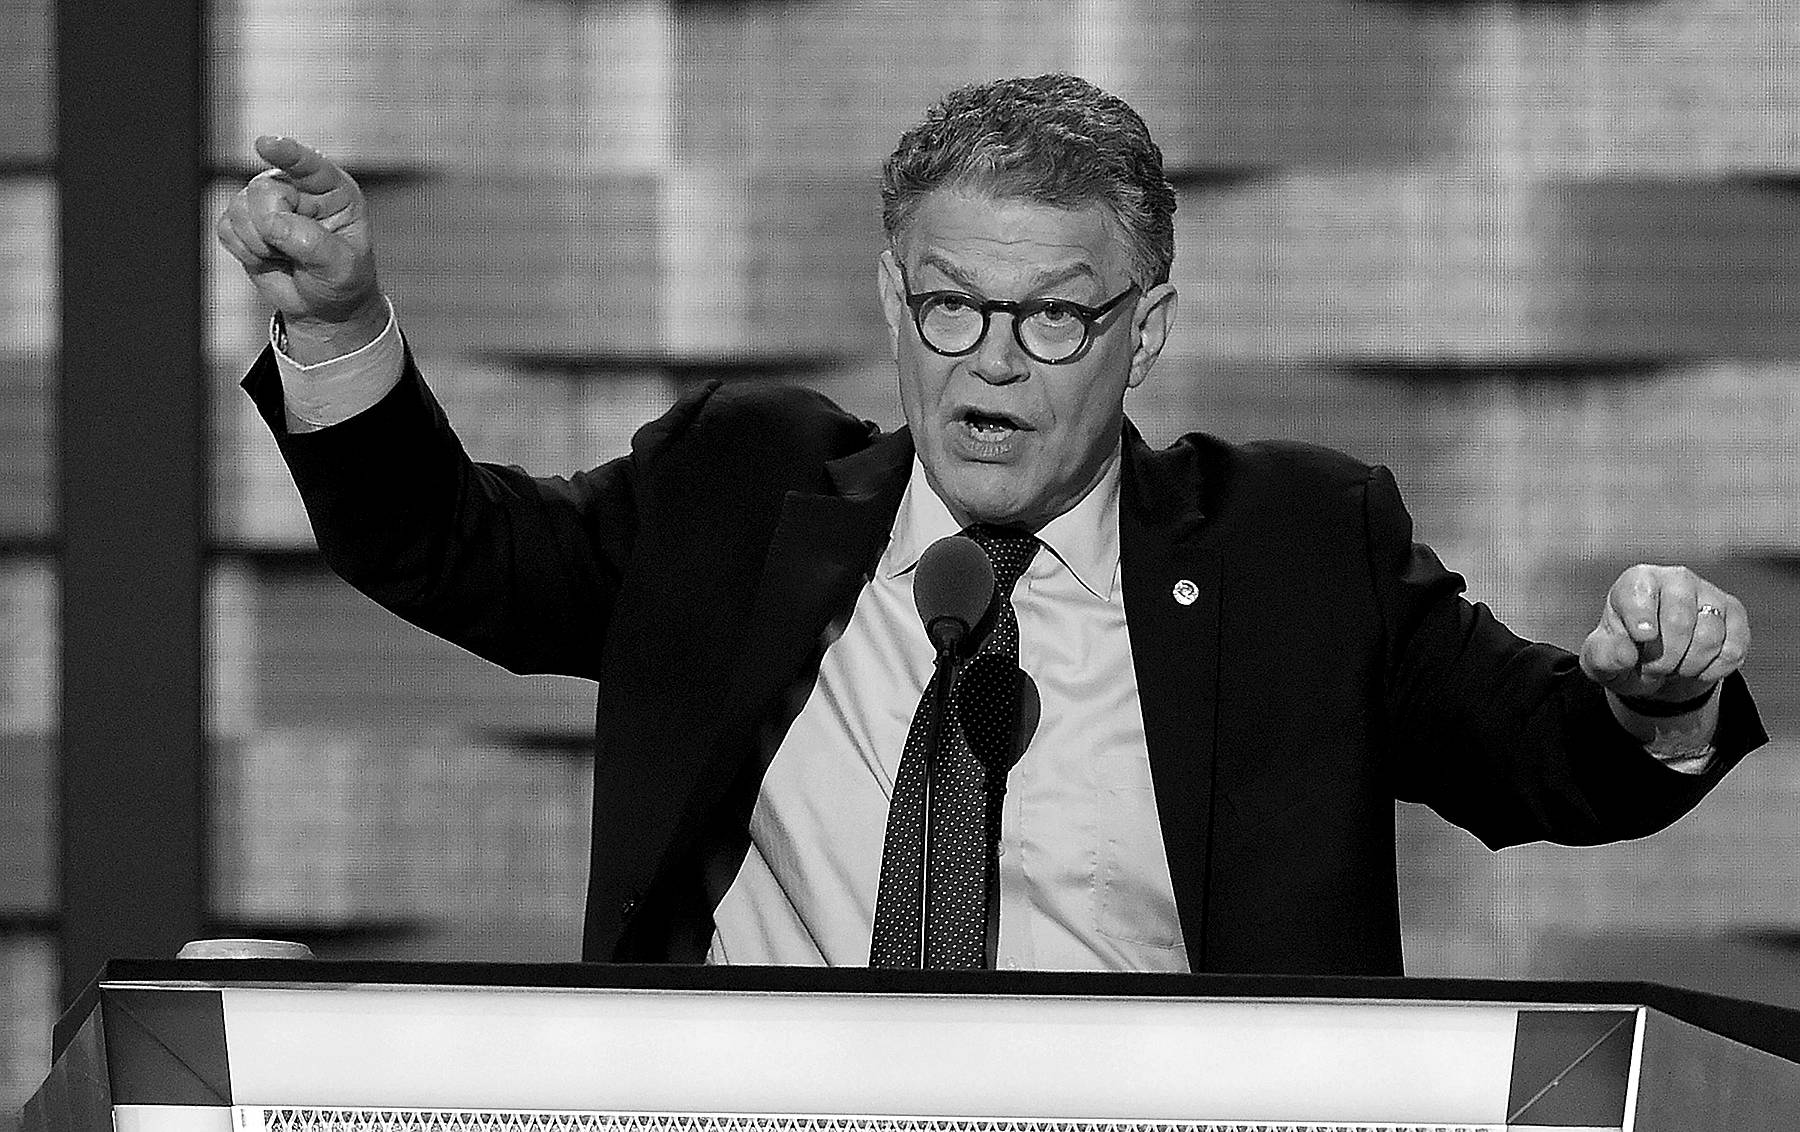 Hit by scandal, Franken faces questions about ability to do job